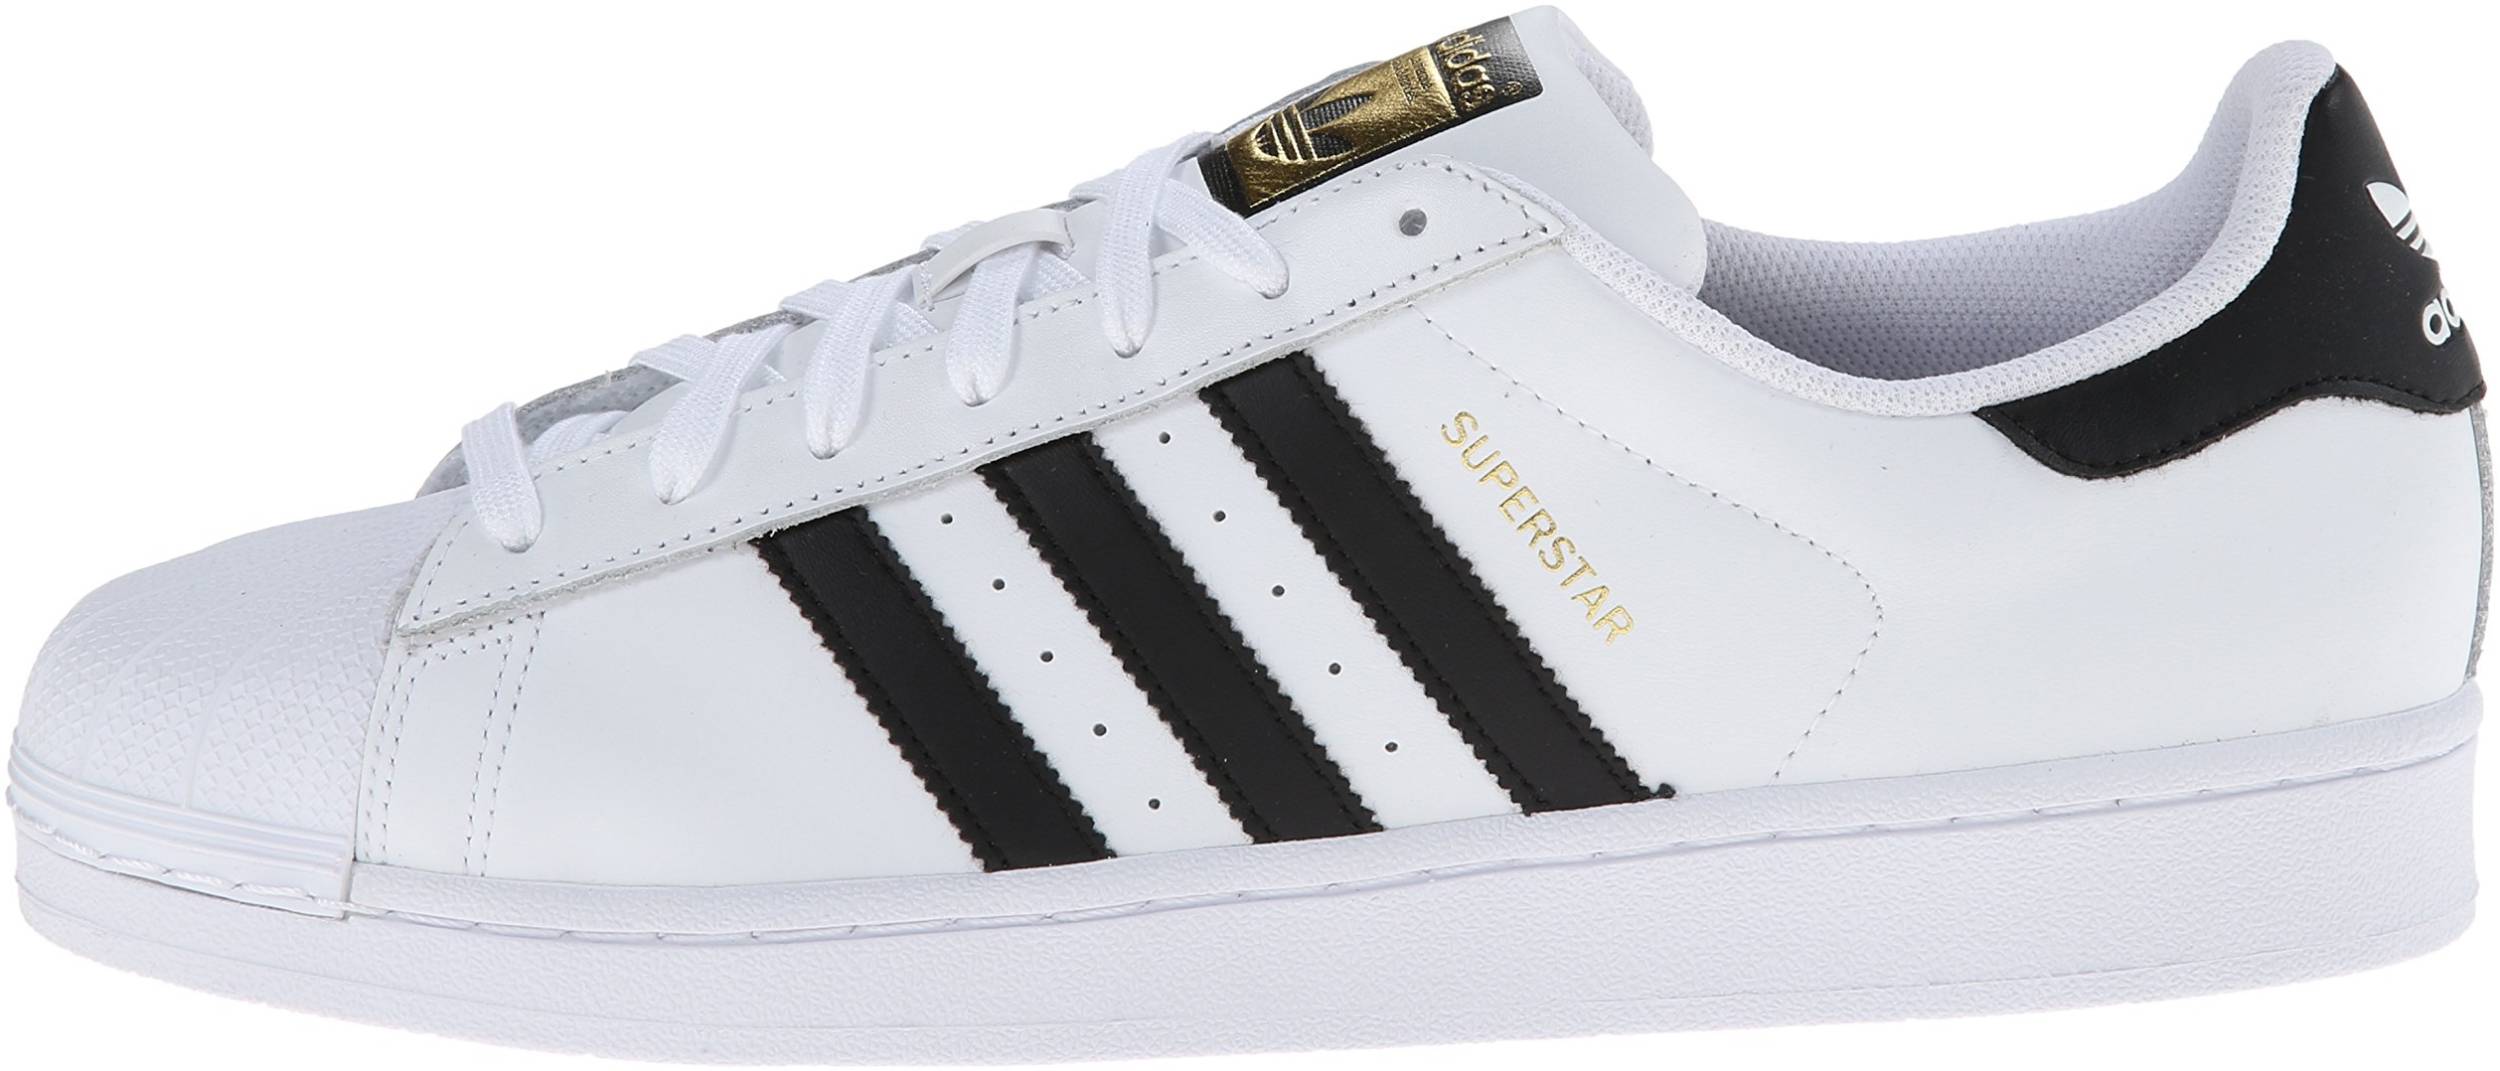 80+ colors of Adidas Superstar (from $35) | RunRepeat